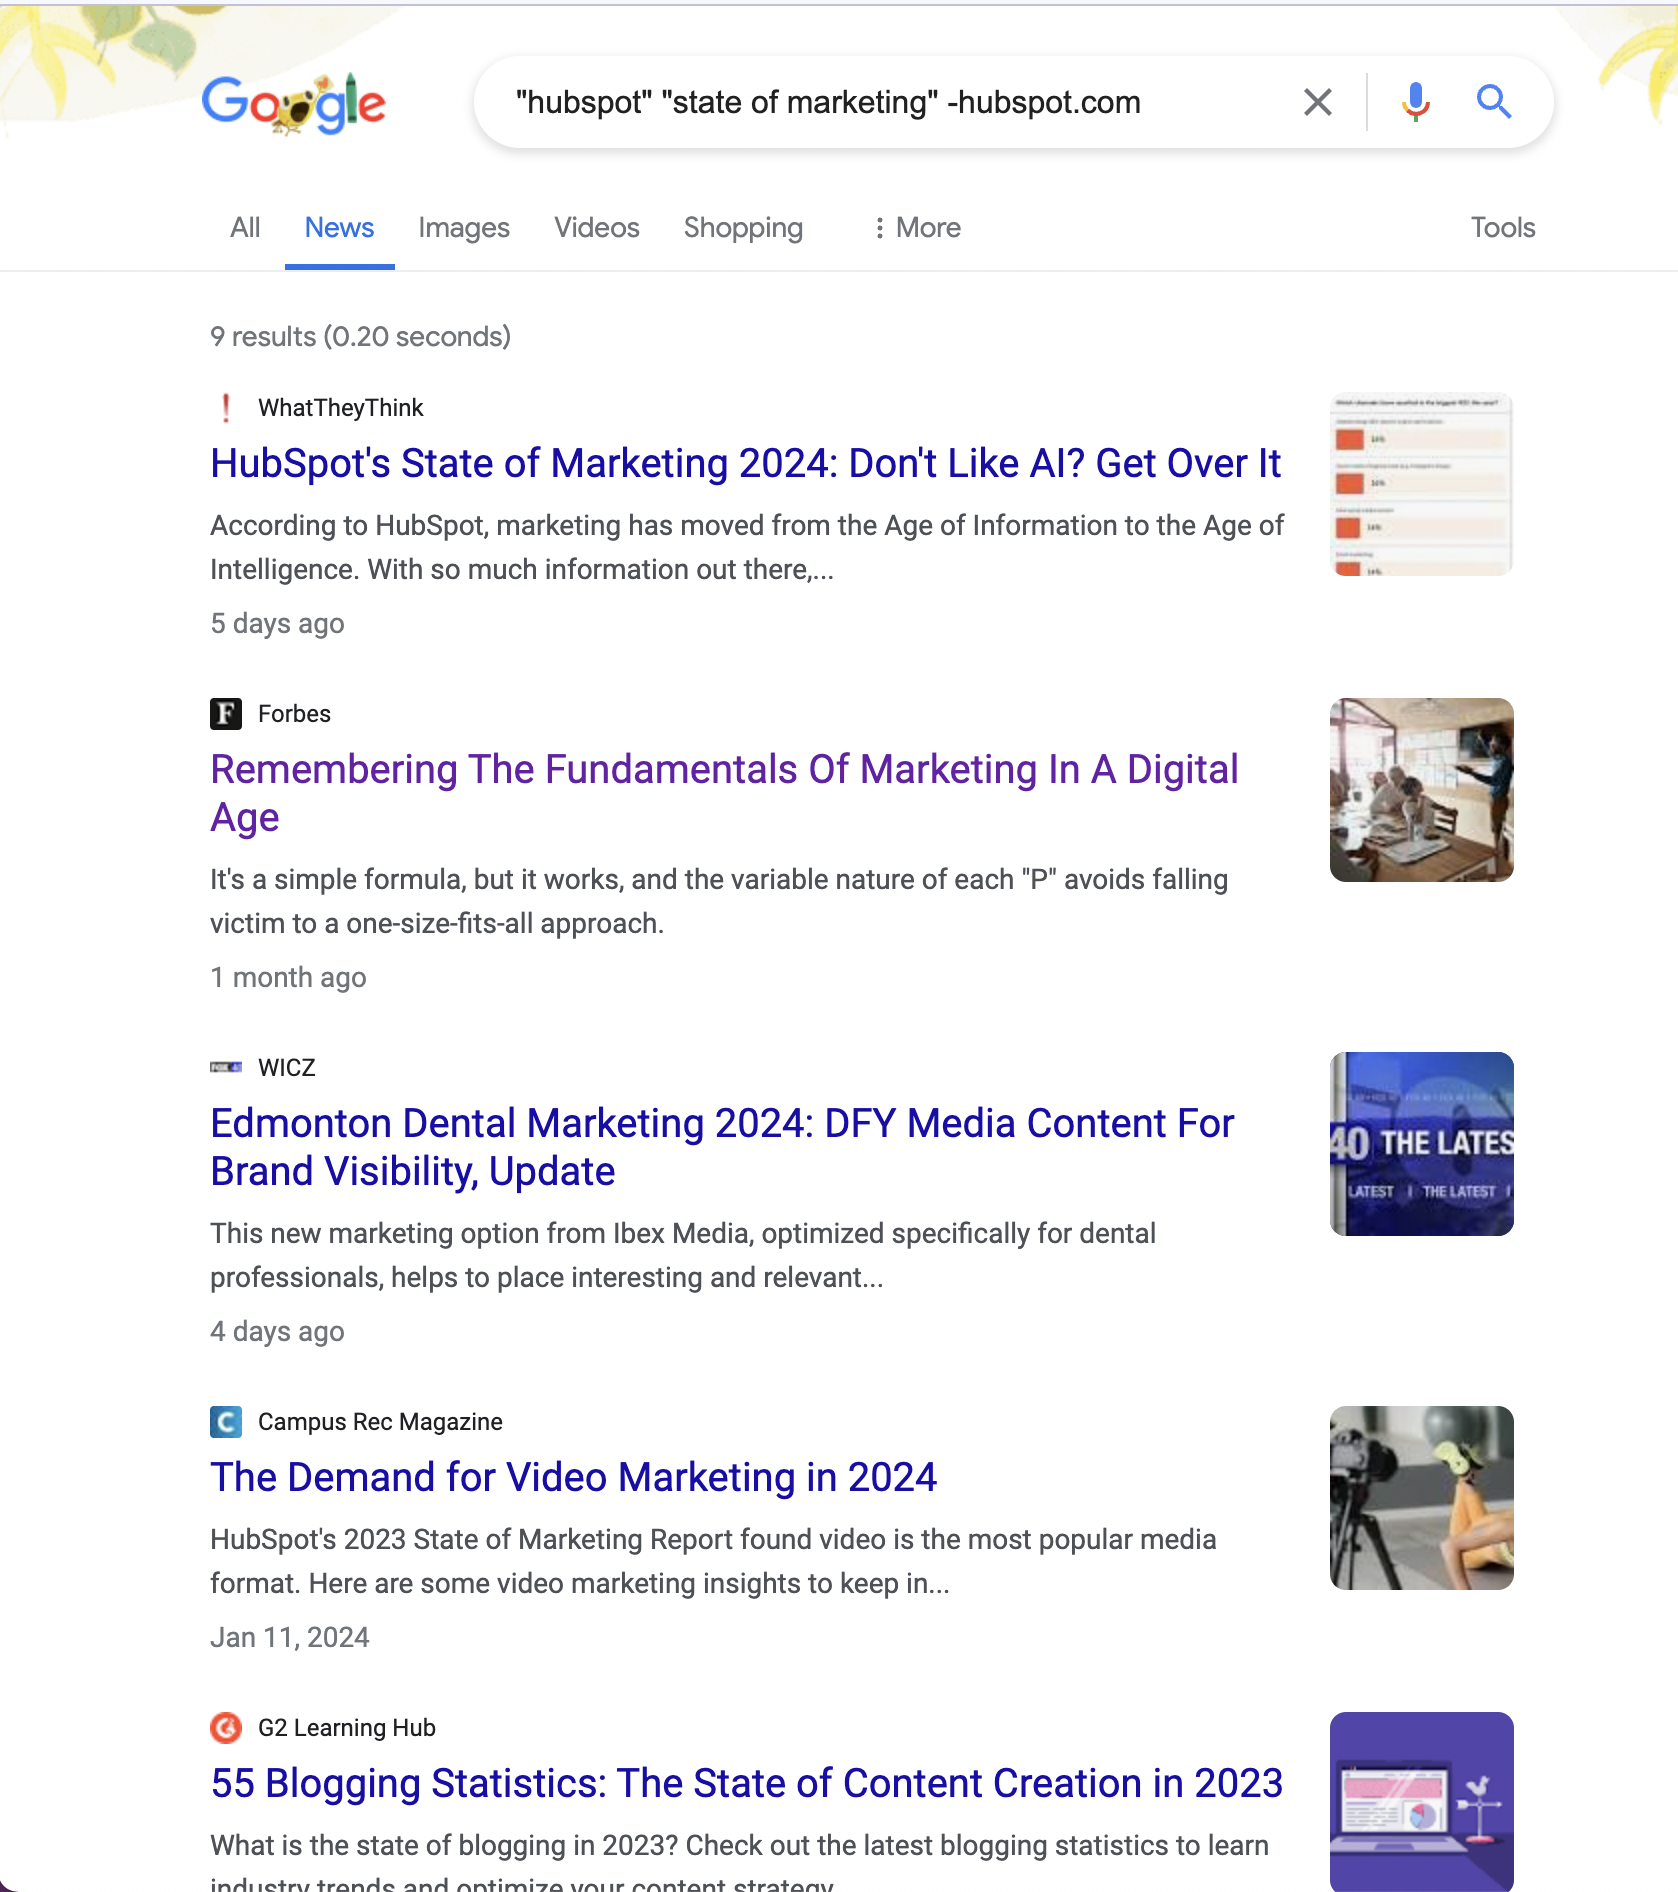 hubspot state of marketing google search